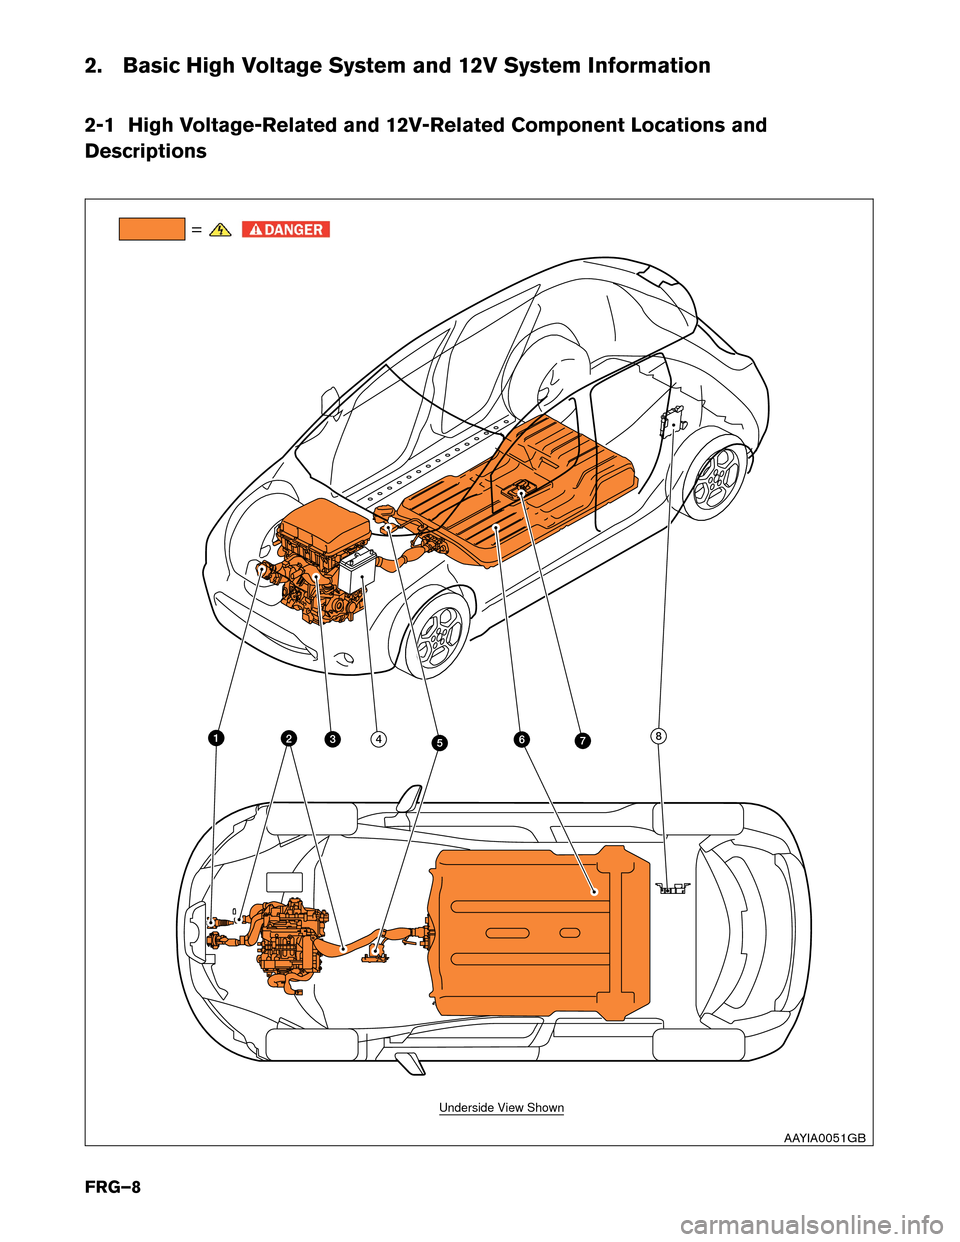 NISSAN LEAF 2015 1.G First Responders Guide 2. Basic High Voltage System and 12V System Information
2-1
High Voltage-Related and 12V-Related Component Locations and
Descriptions =
76
342 8
5 1
Underside View Shown
AAYIA0051GB
FRG–8  